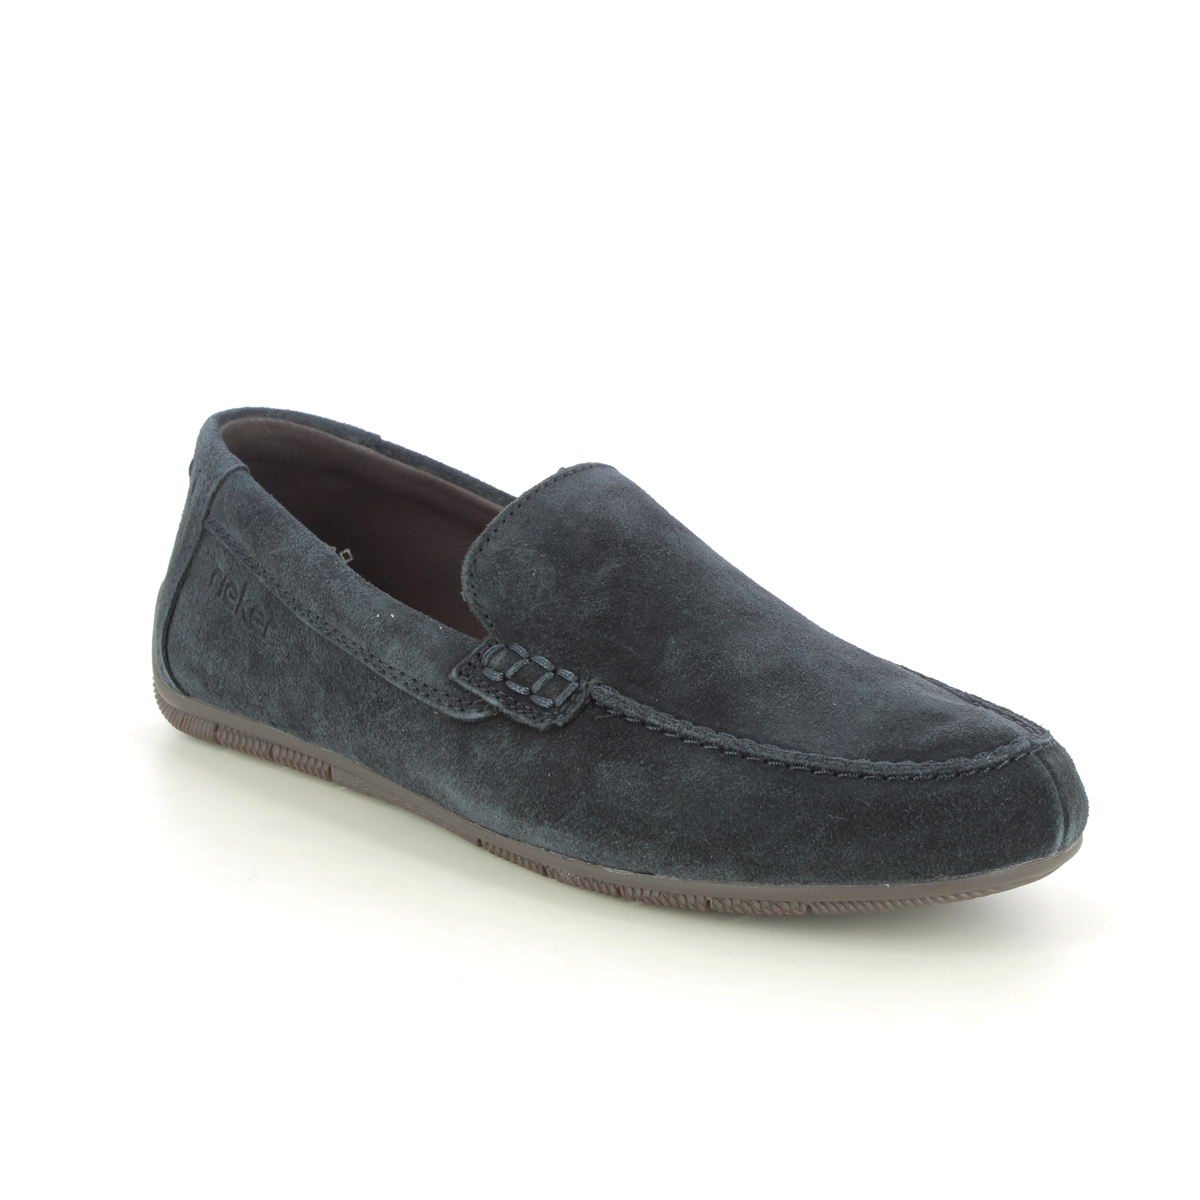 Rieker 09557-14 Navy Suede Mens Loafers in a Plain Leather in Size 42